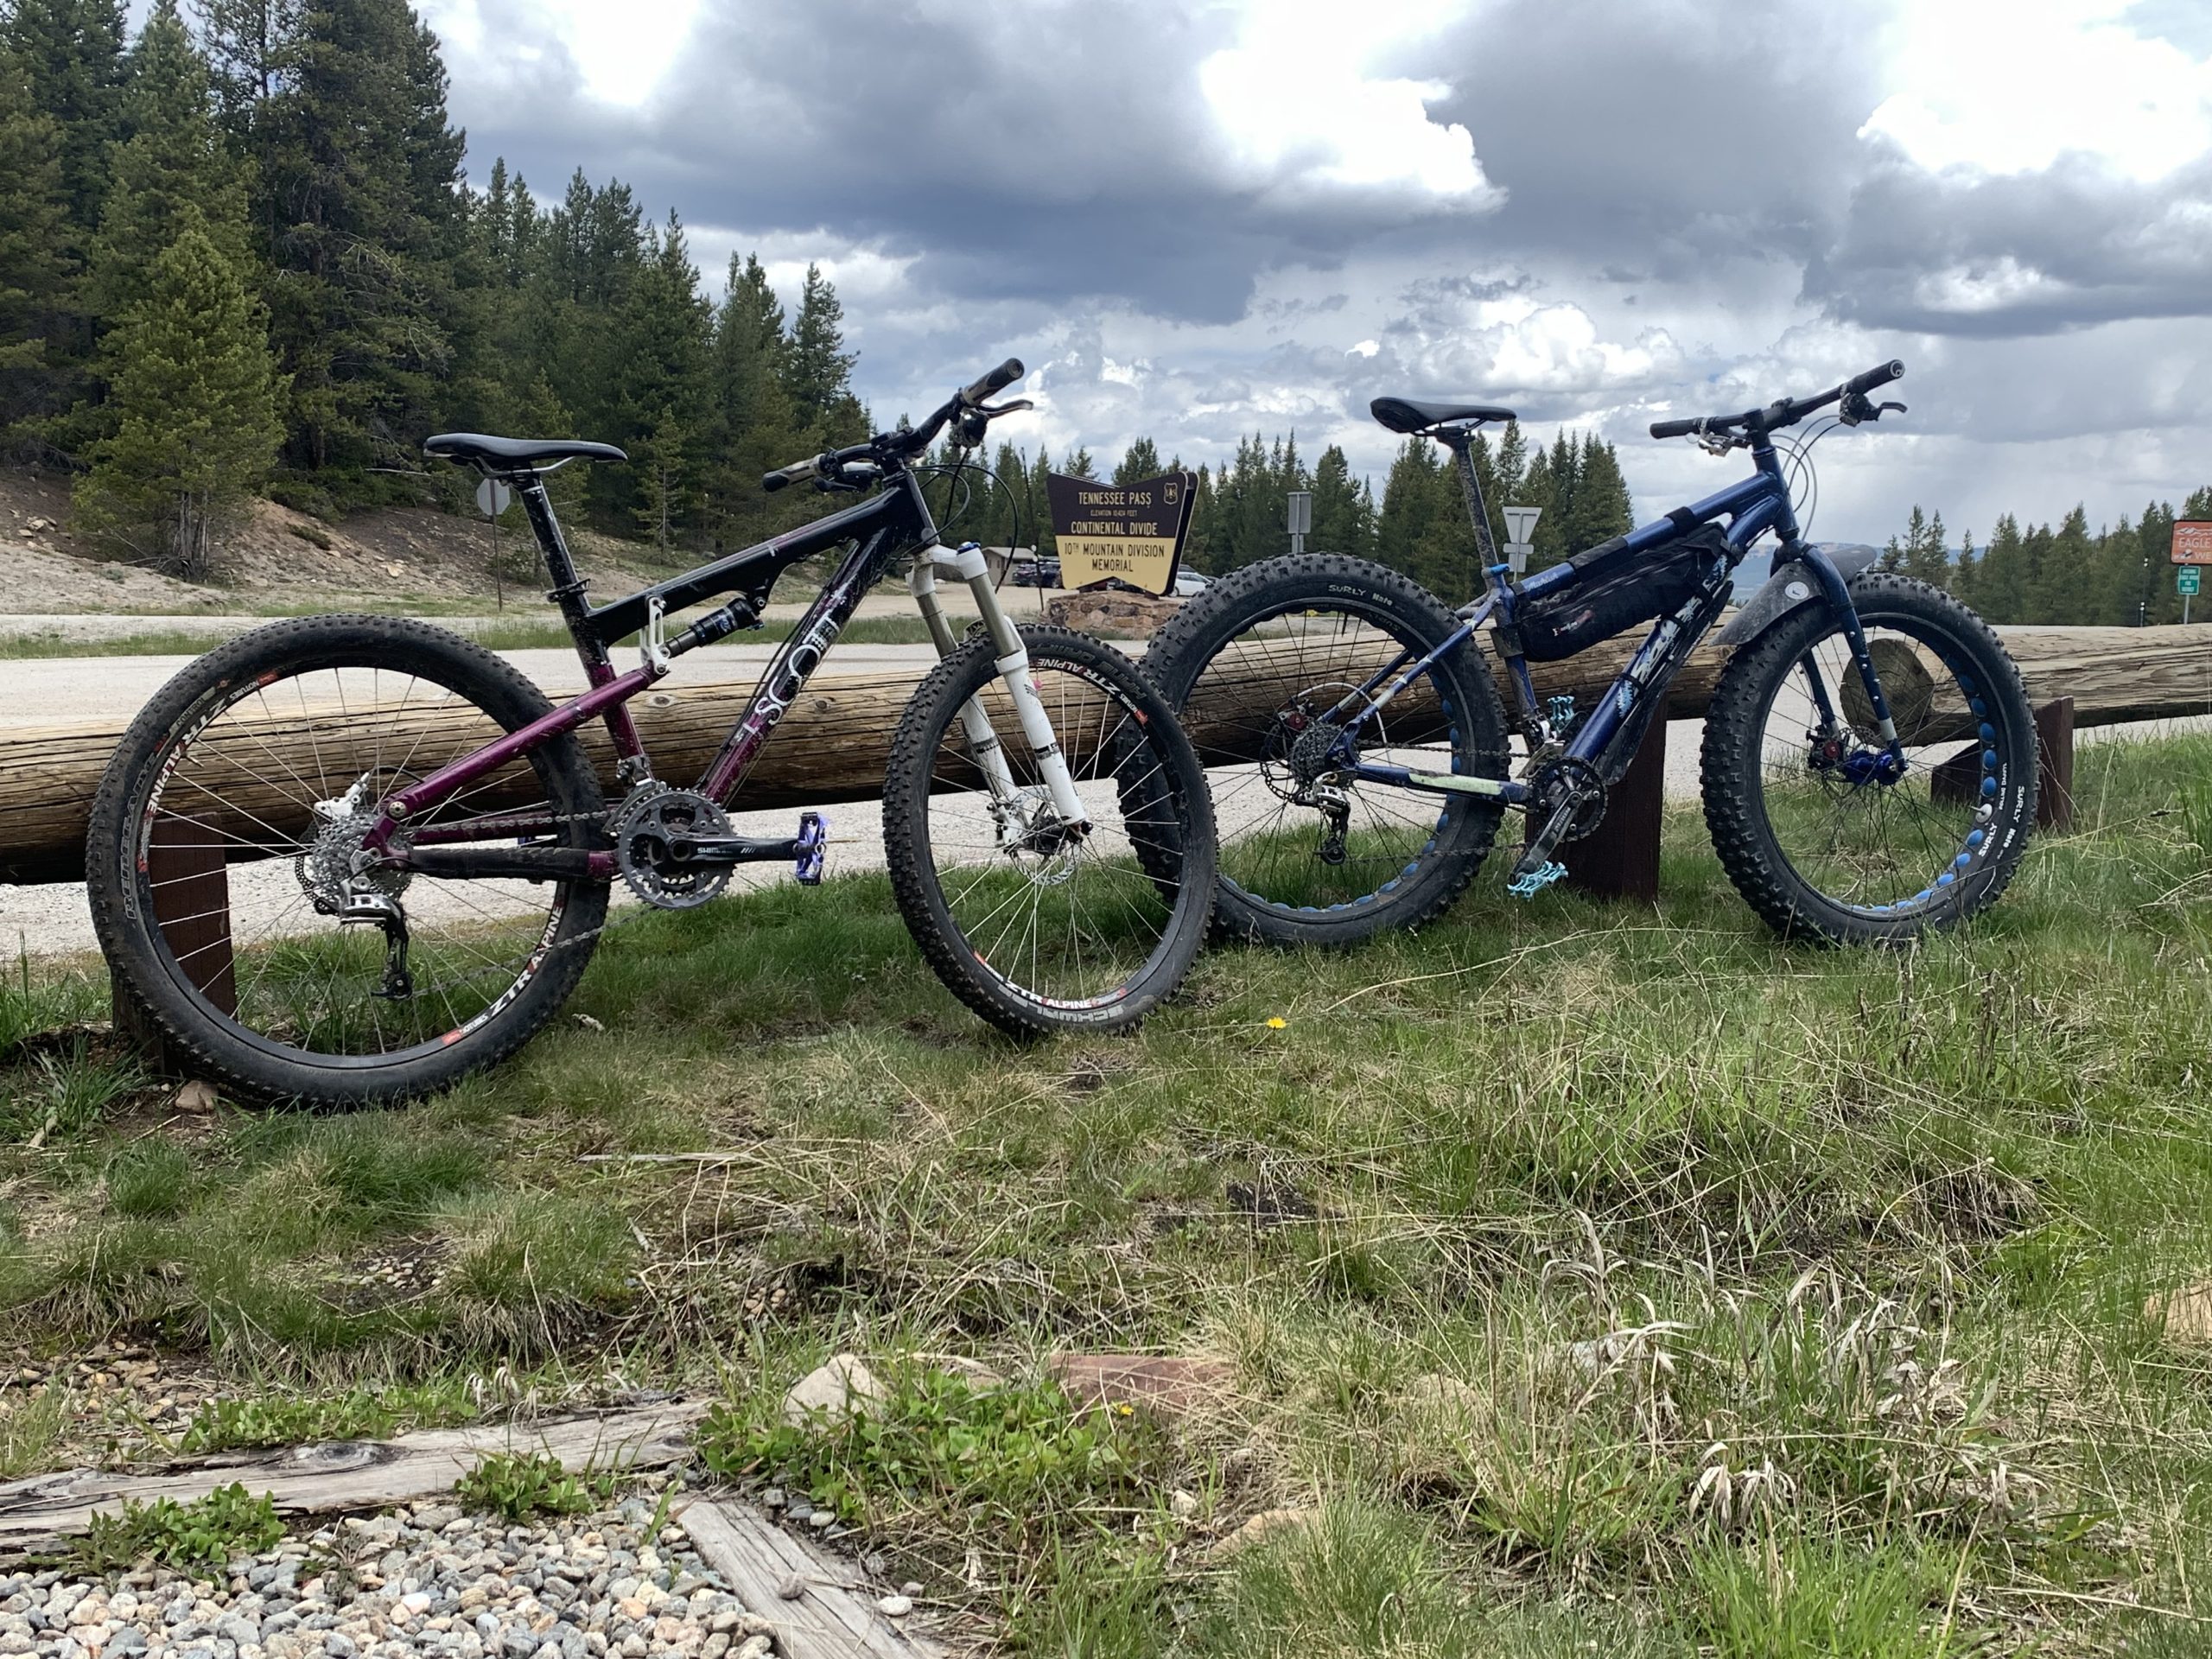 Two mountain bikes leaning against a railing up on a mountain pass.